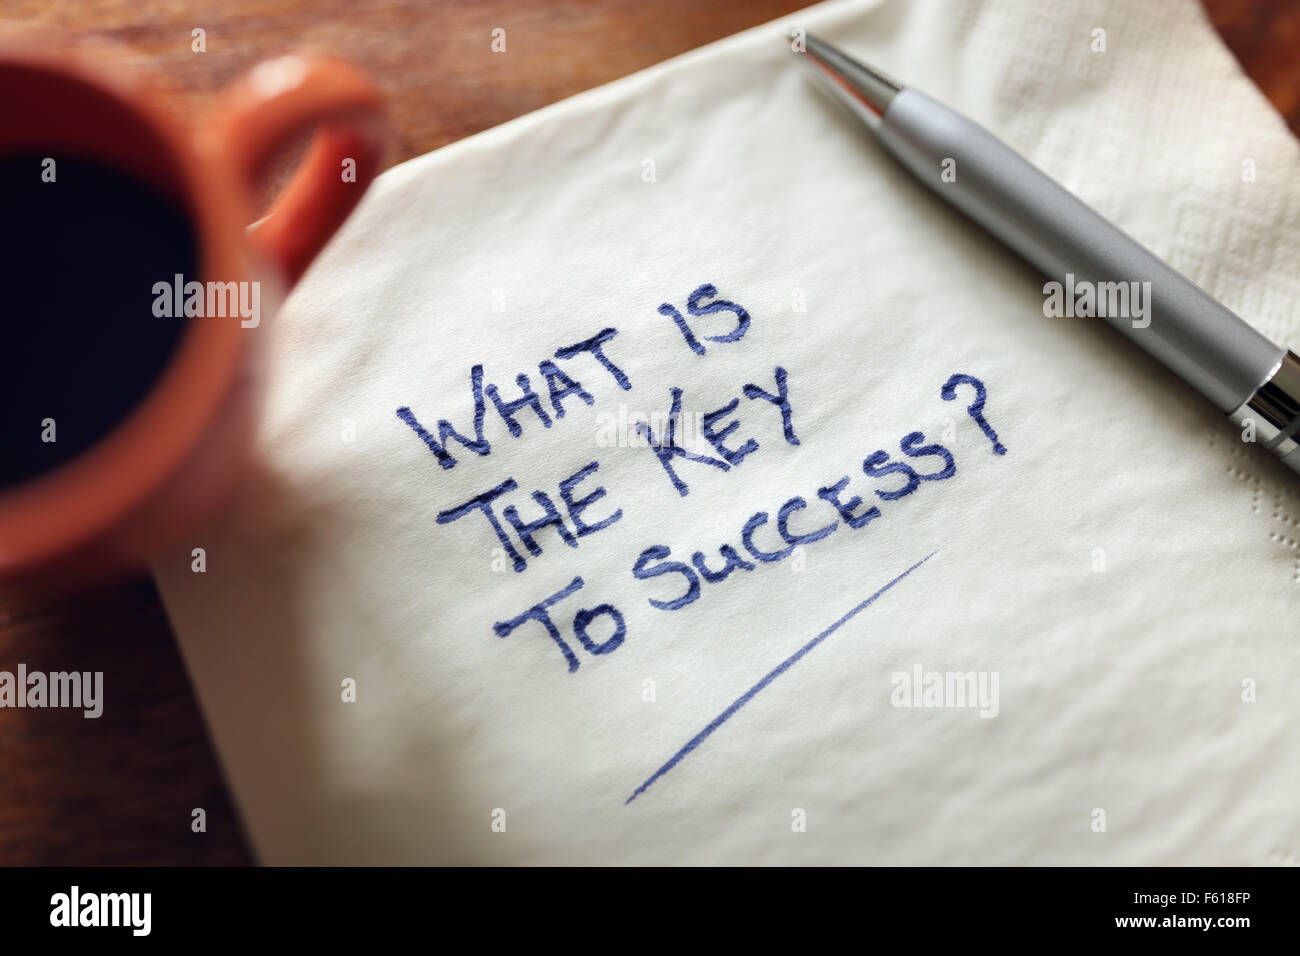 What is the key to success inspirational business concept Stock Photo